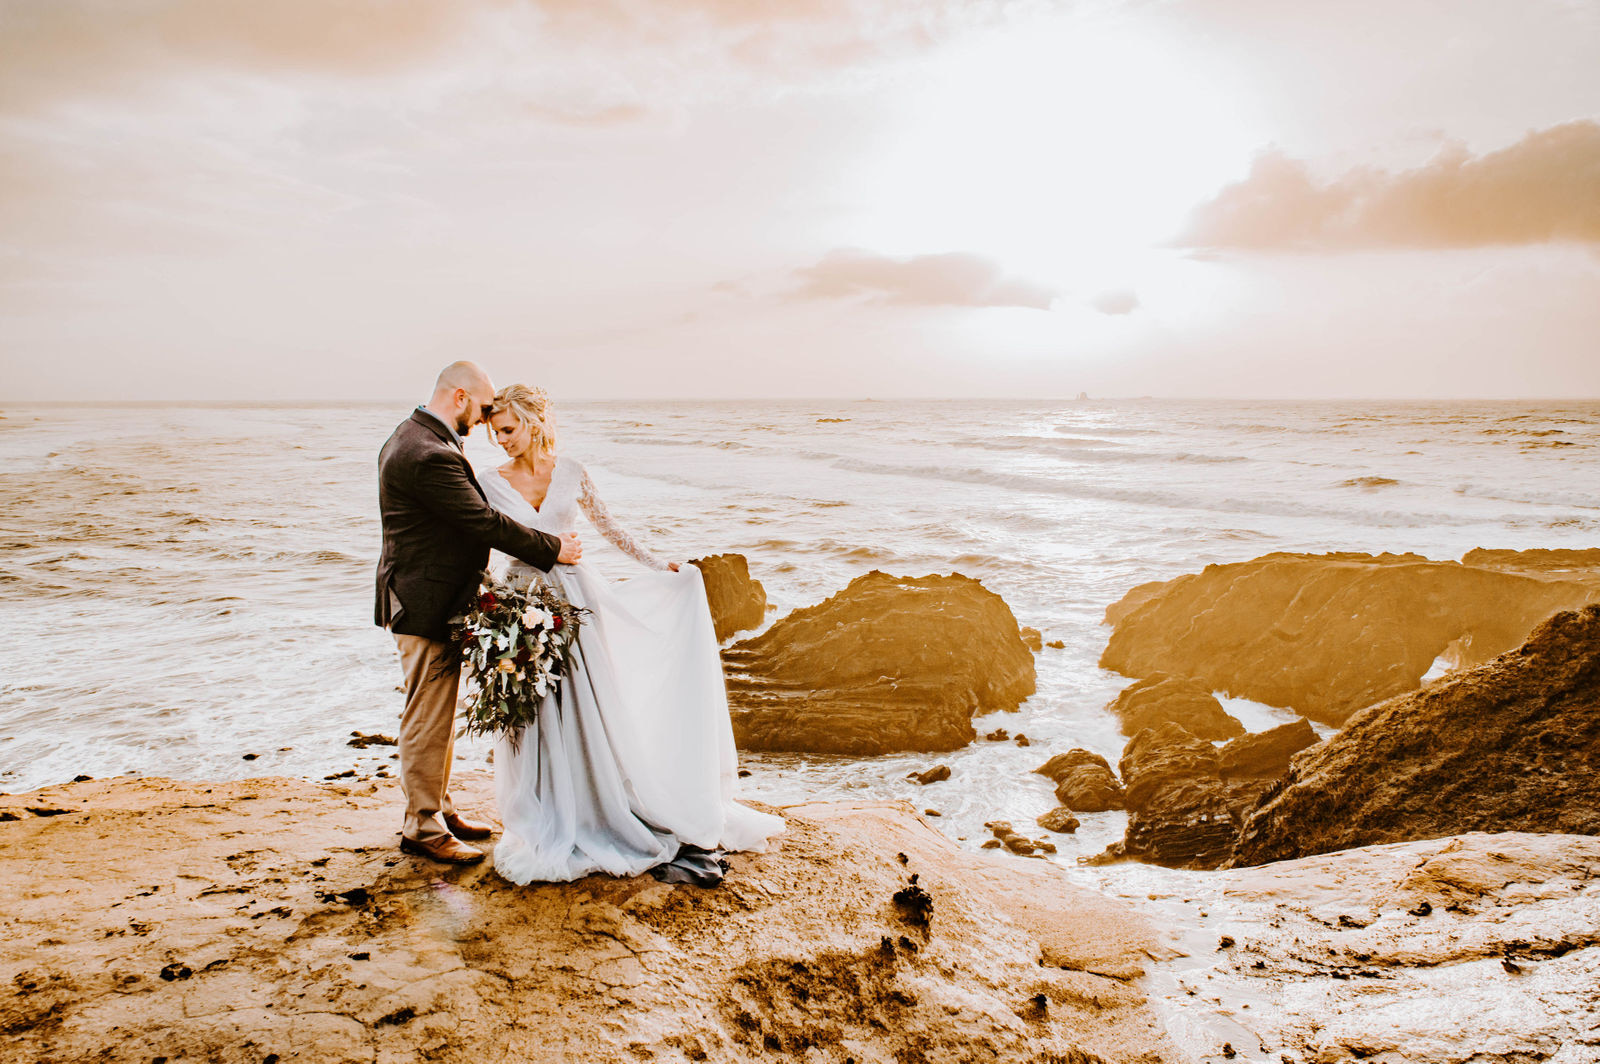 A bride and groom standing forehead to forehead overlooking the ocean during sunset at Otter Point in Gold Beach.